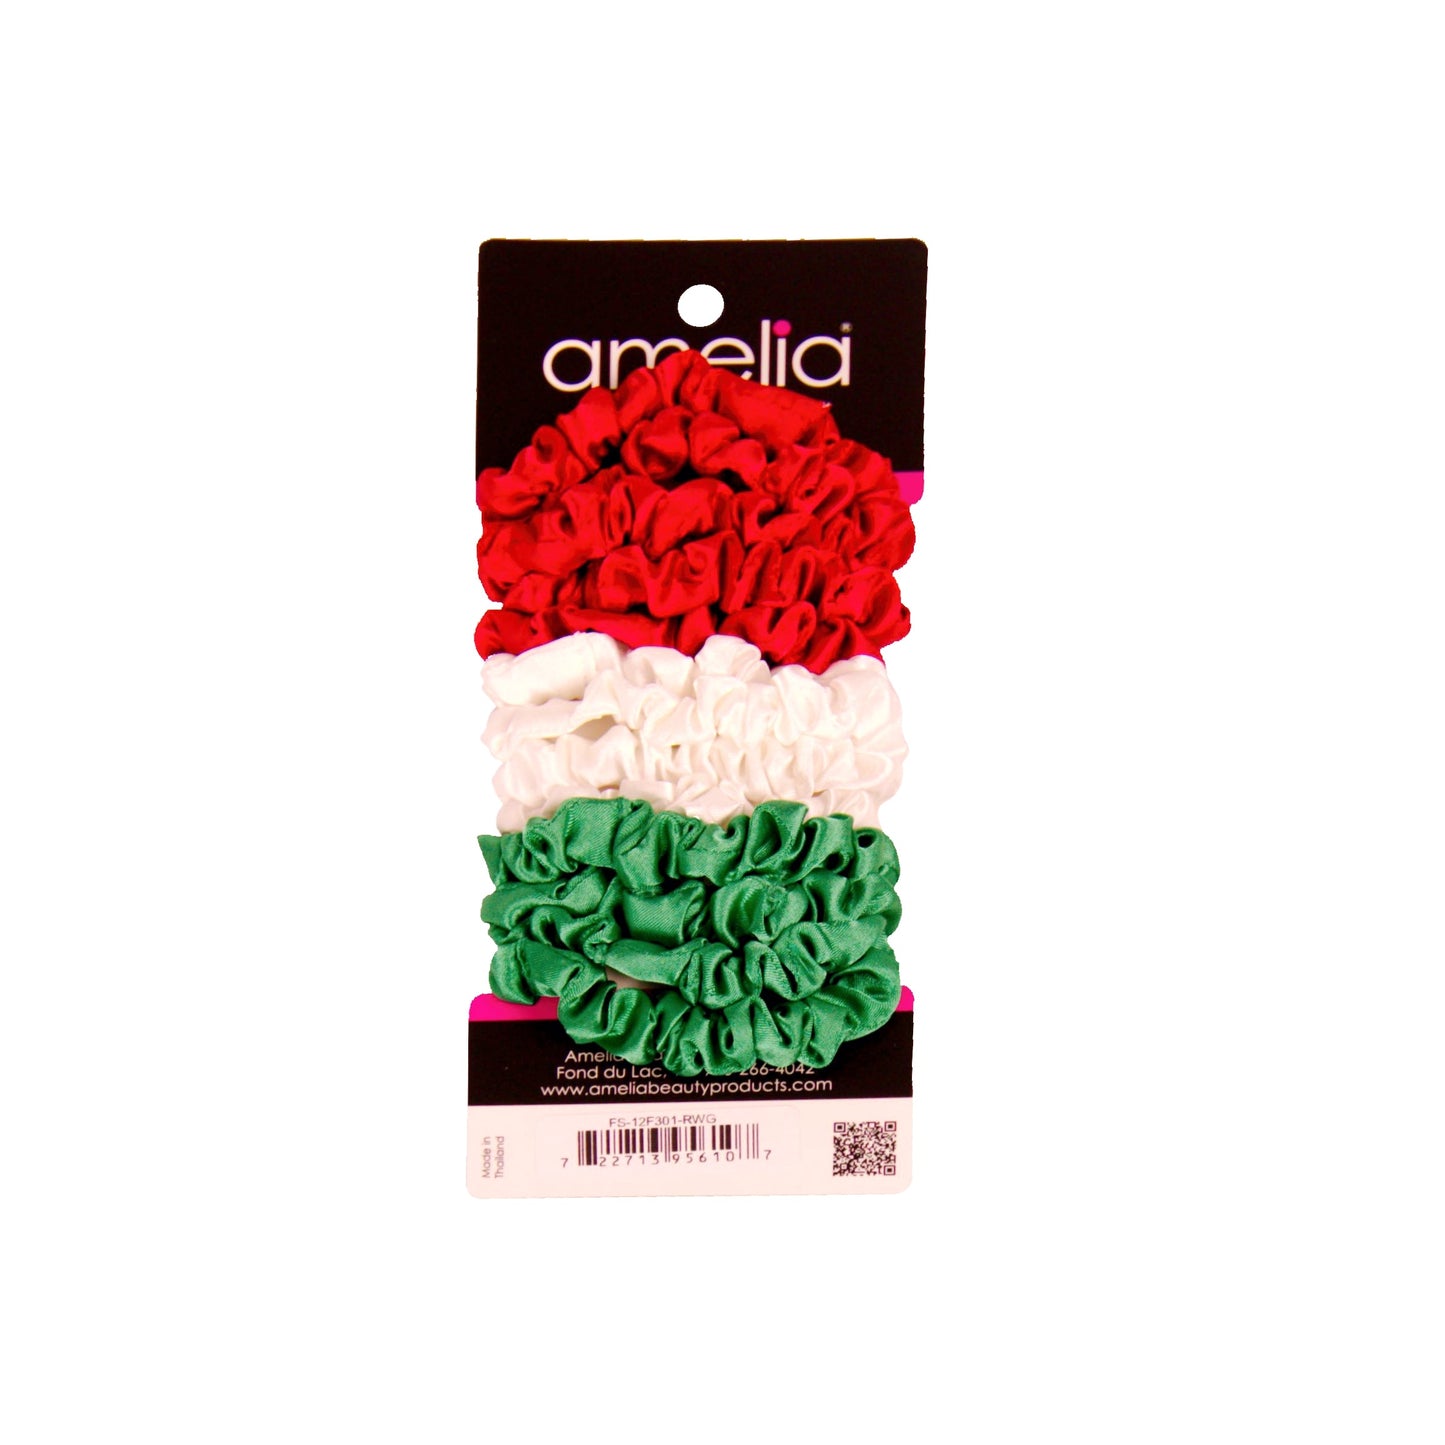 Amelia Beauty, Red, White and Green Satin Scrunchies, 2.25in Diameter, Gentle on Hair, Strong Hold, No Snag, No Dents or Creases. 12 Pack - 12 Retail Packs